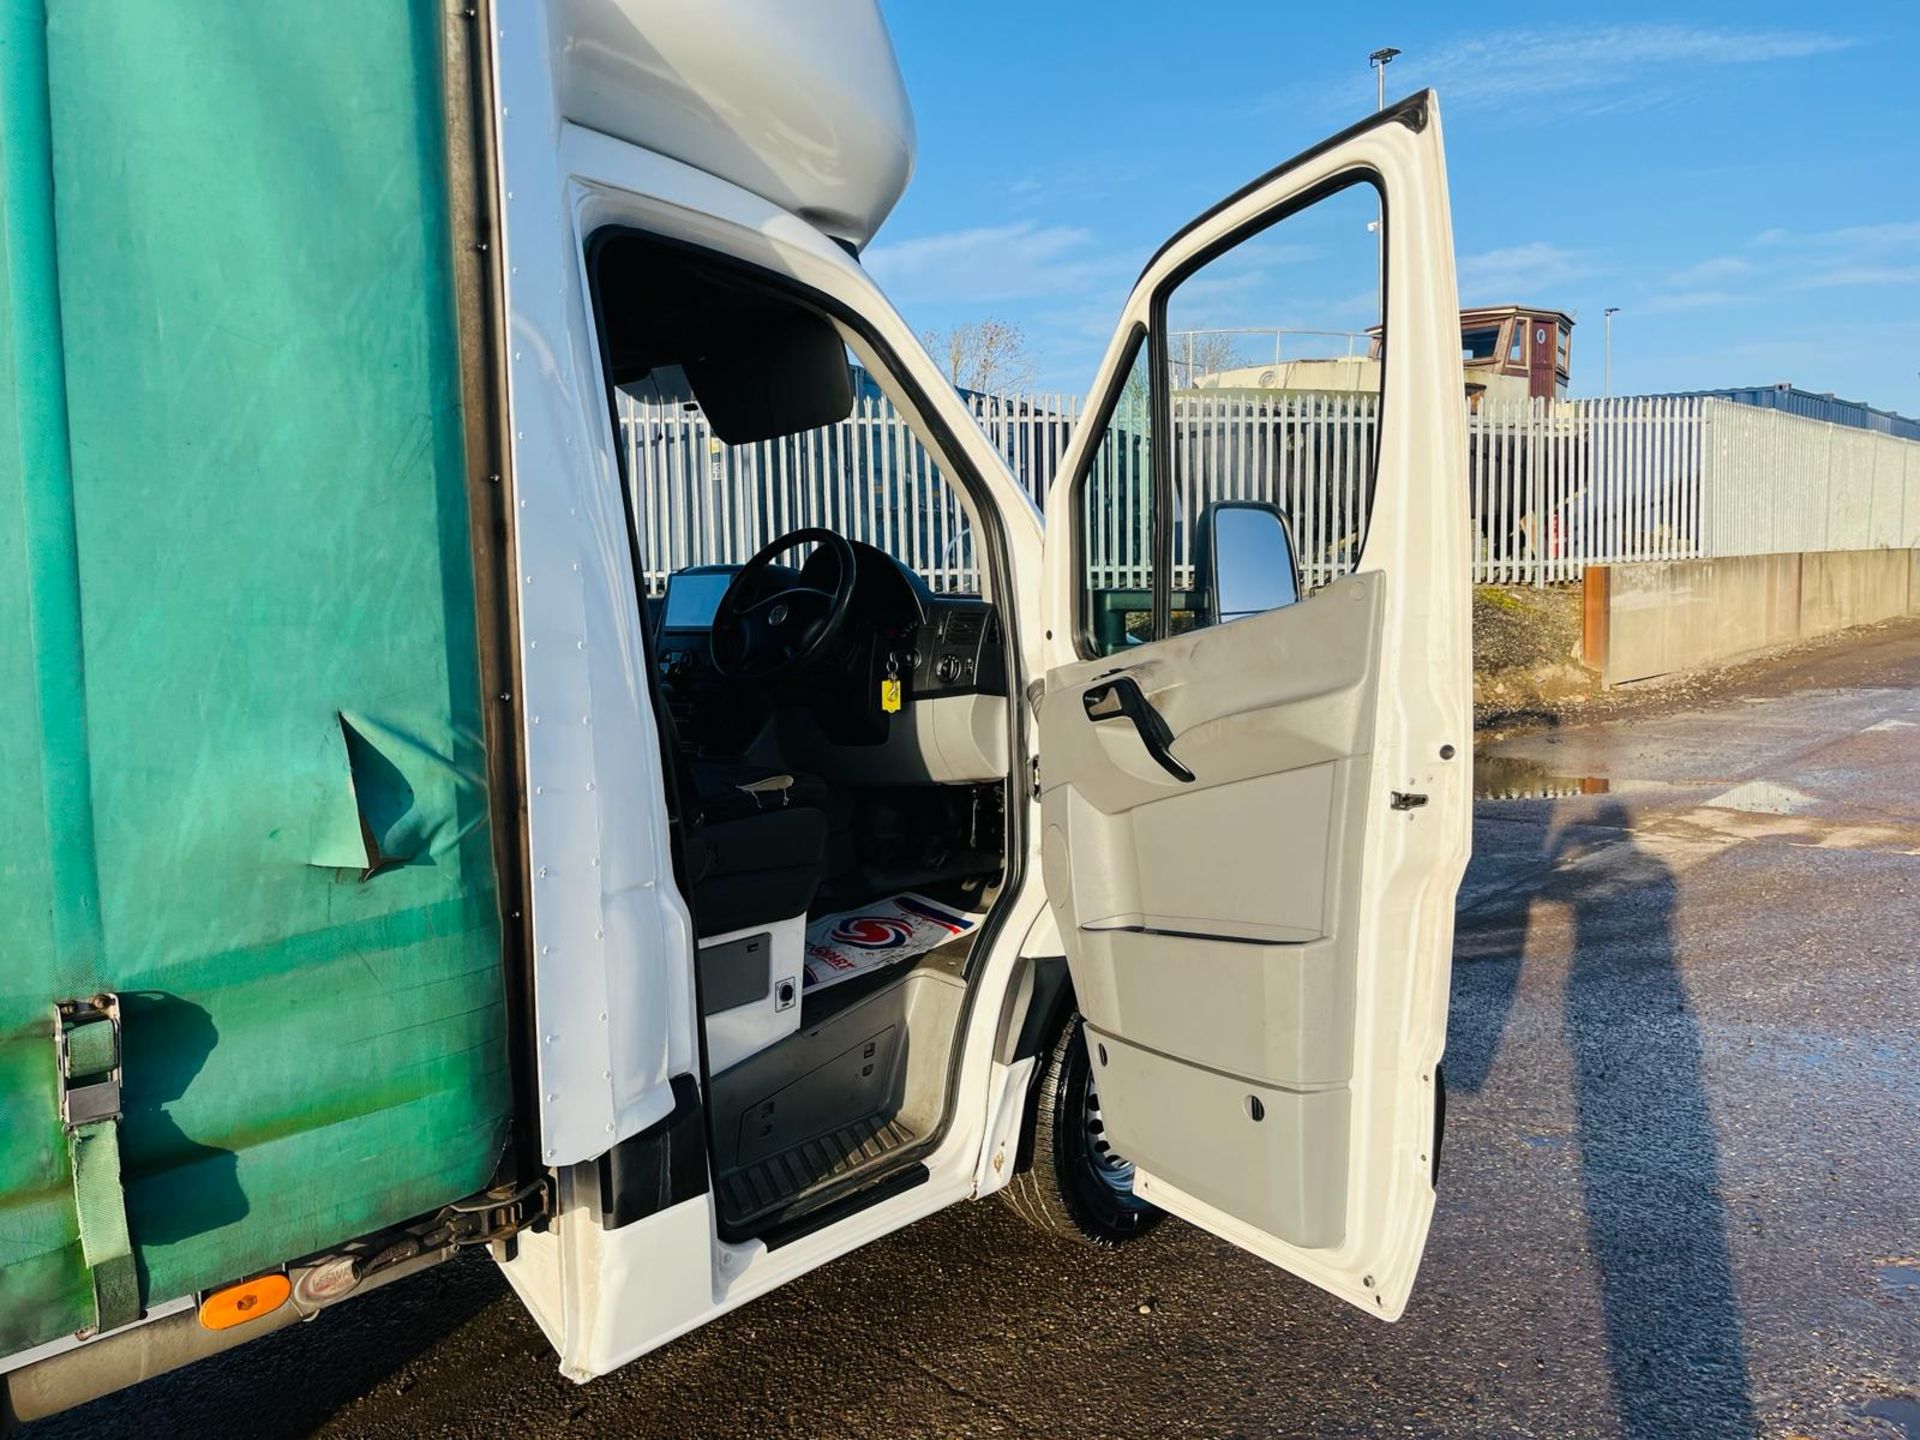 Volkswagen Crafter Curtain Side 2.0L TDI 109 L3 H1 - 2011 '61 Reg'- Air Conditioning -No Vat - Image 12 of 24